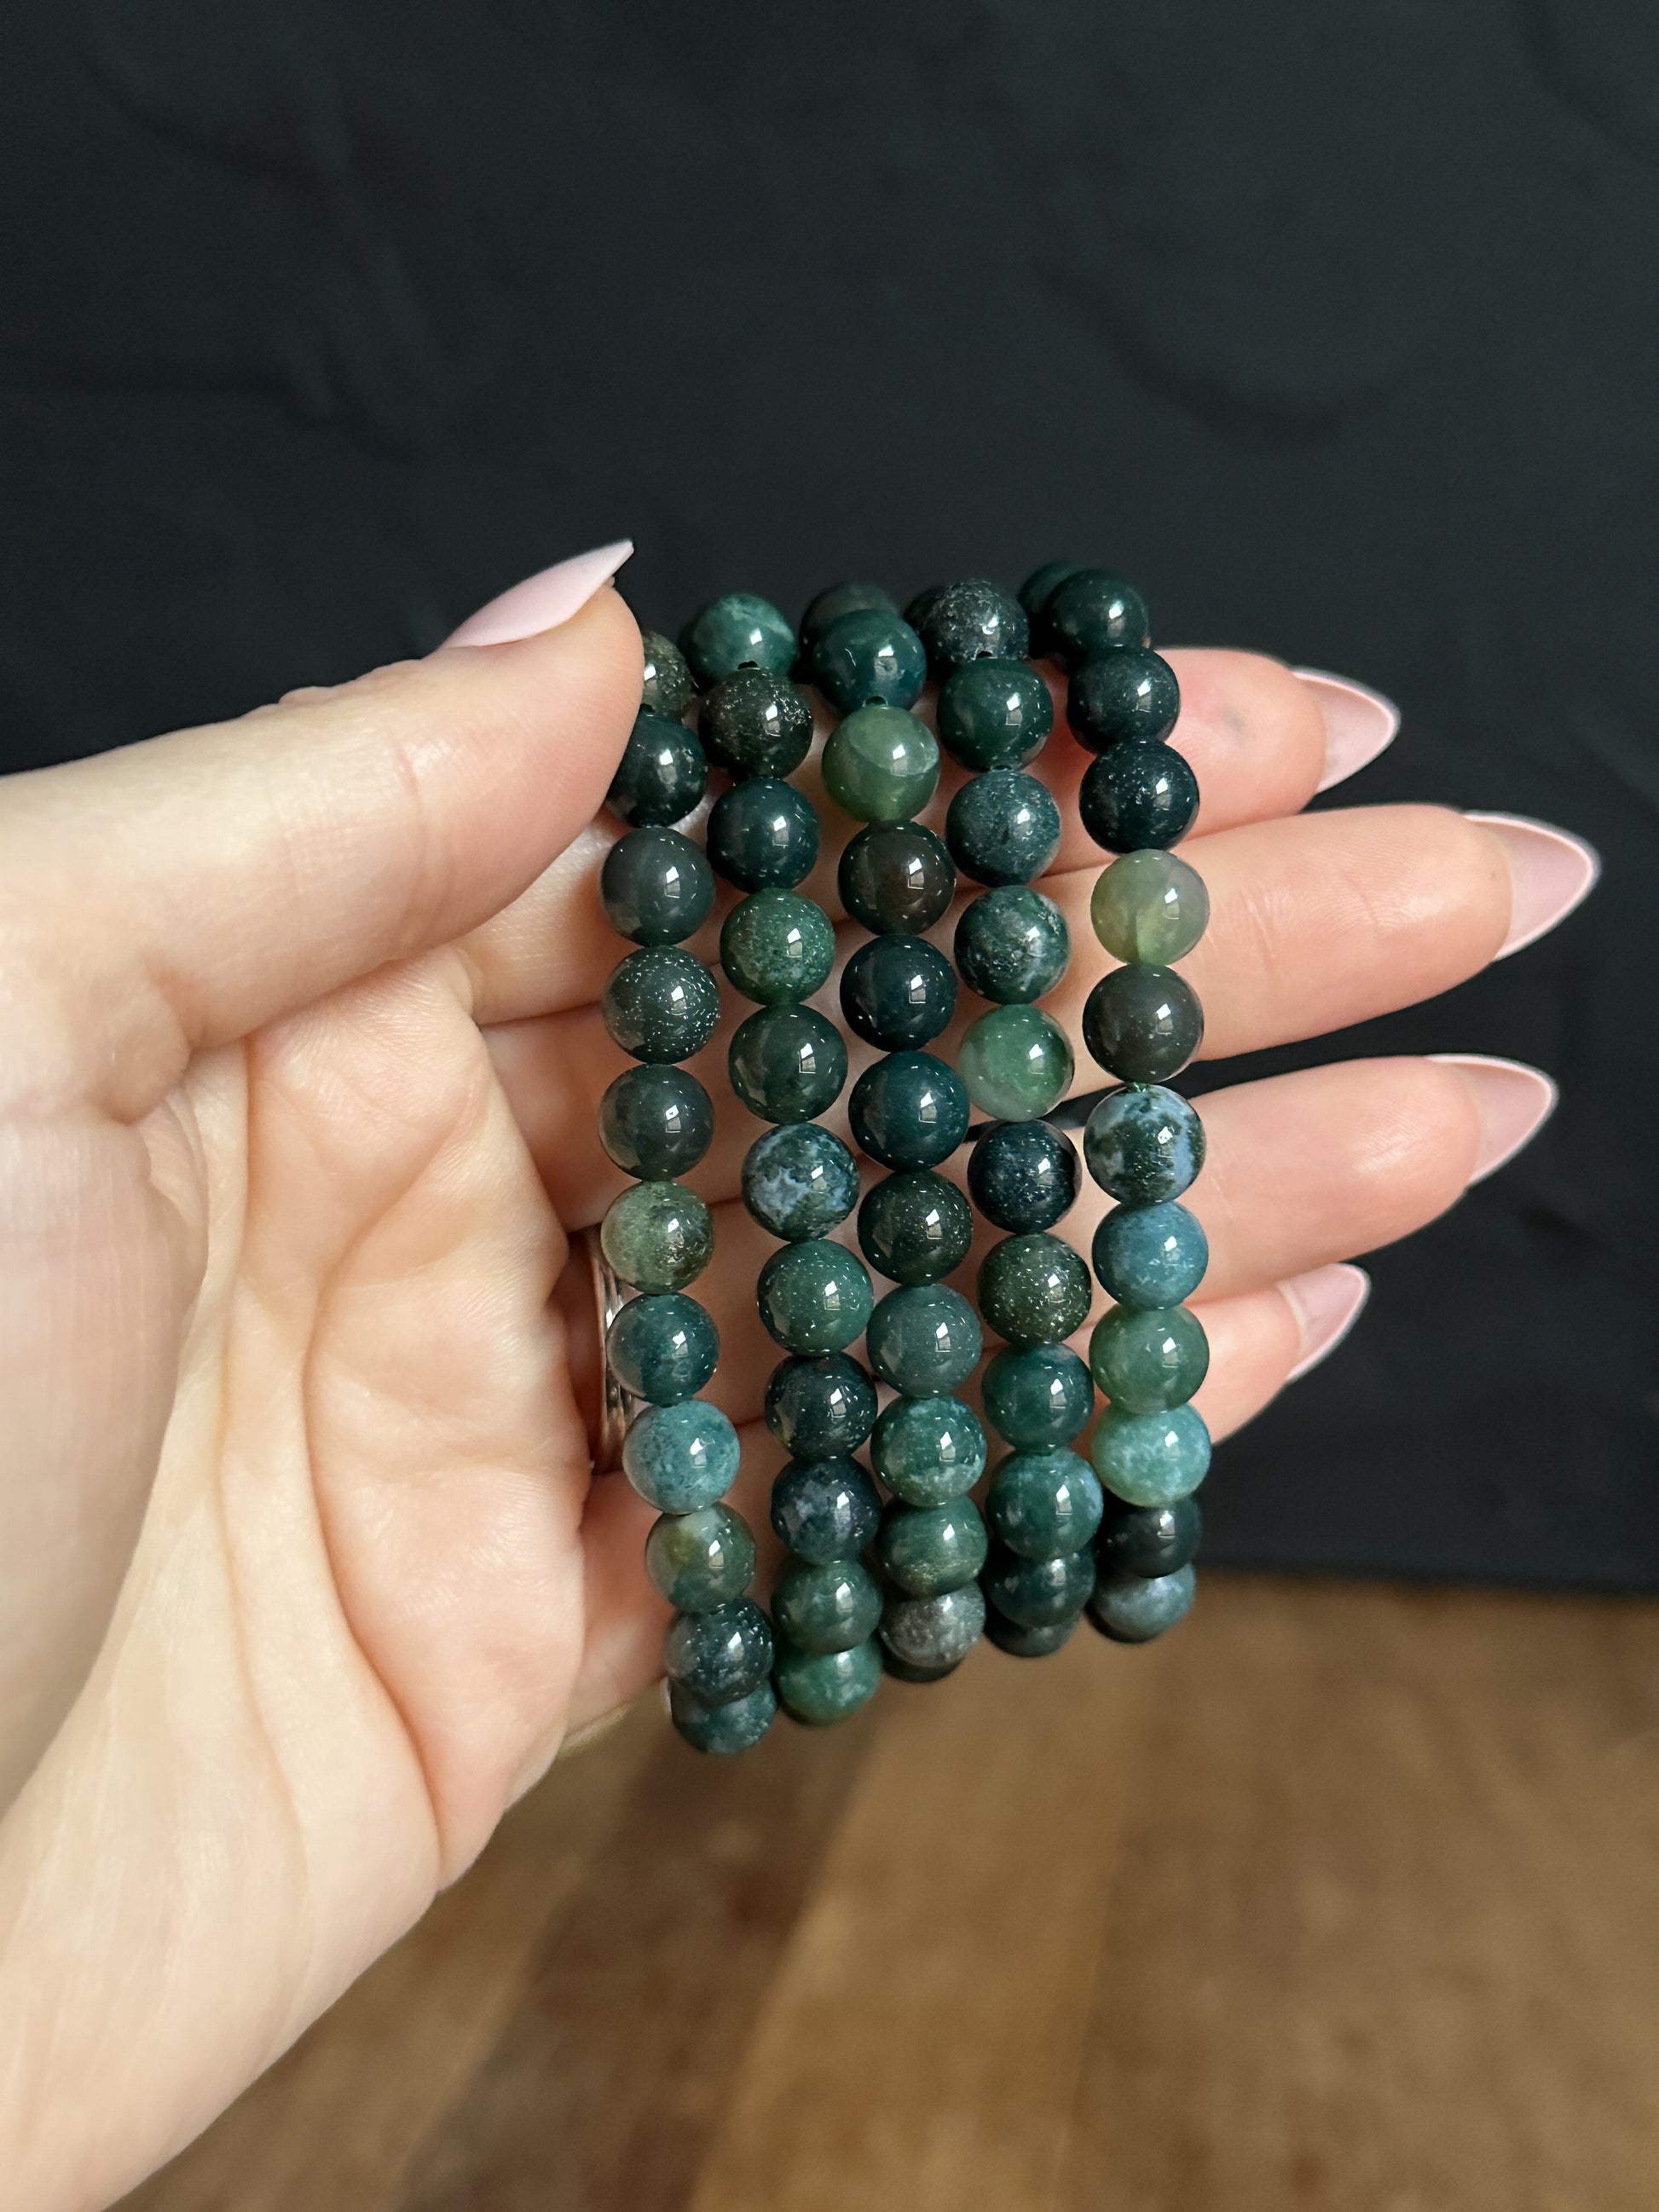 It is a perfect way to carry your favourite healing crystal/gemstone with you all day long! This bracelet is perfect by itself or even stacked with others. These are The Stone Maidens 8mm Moss Agate Bracelet 